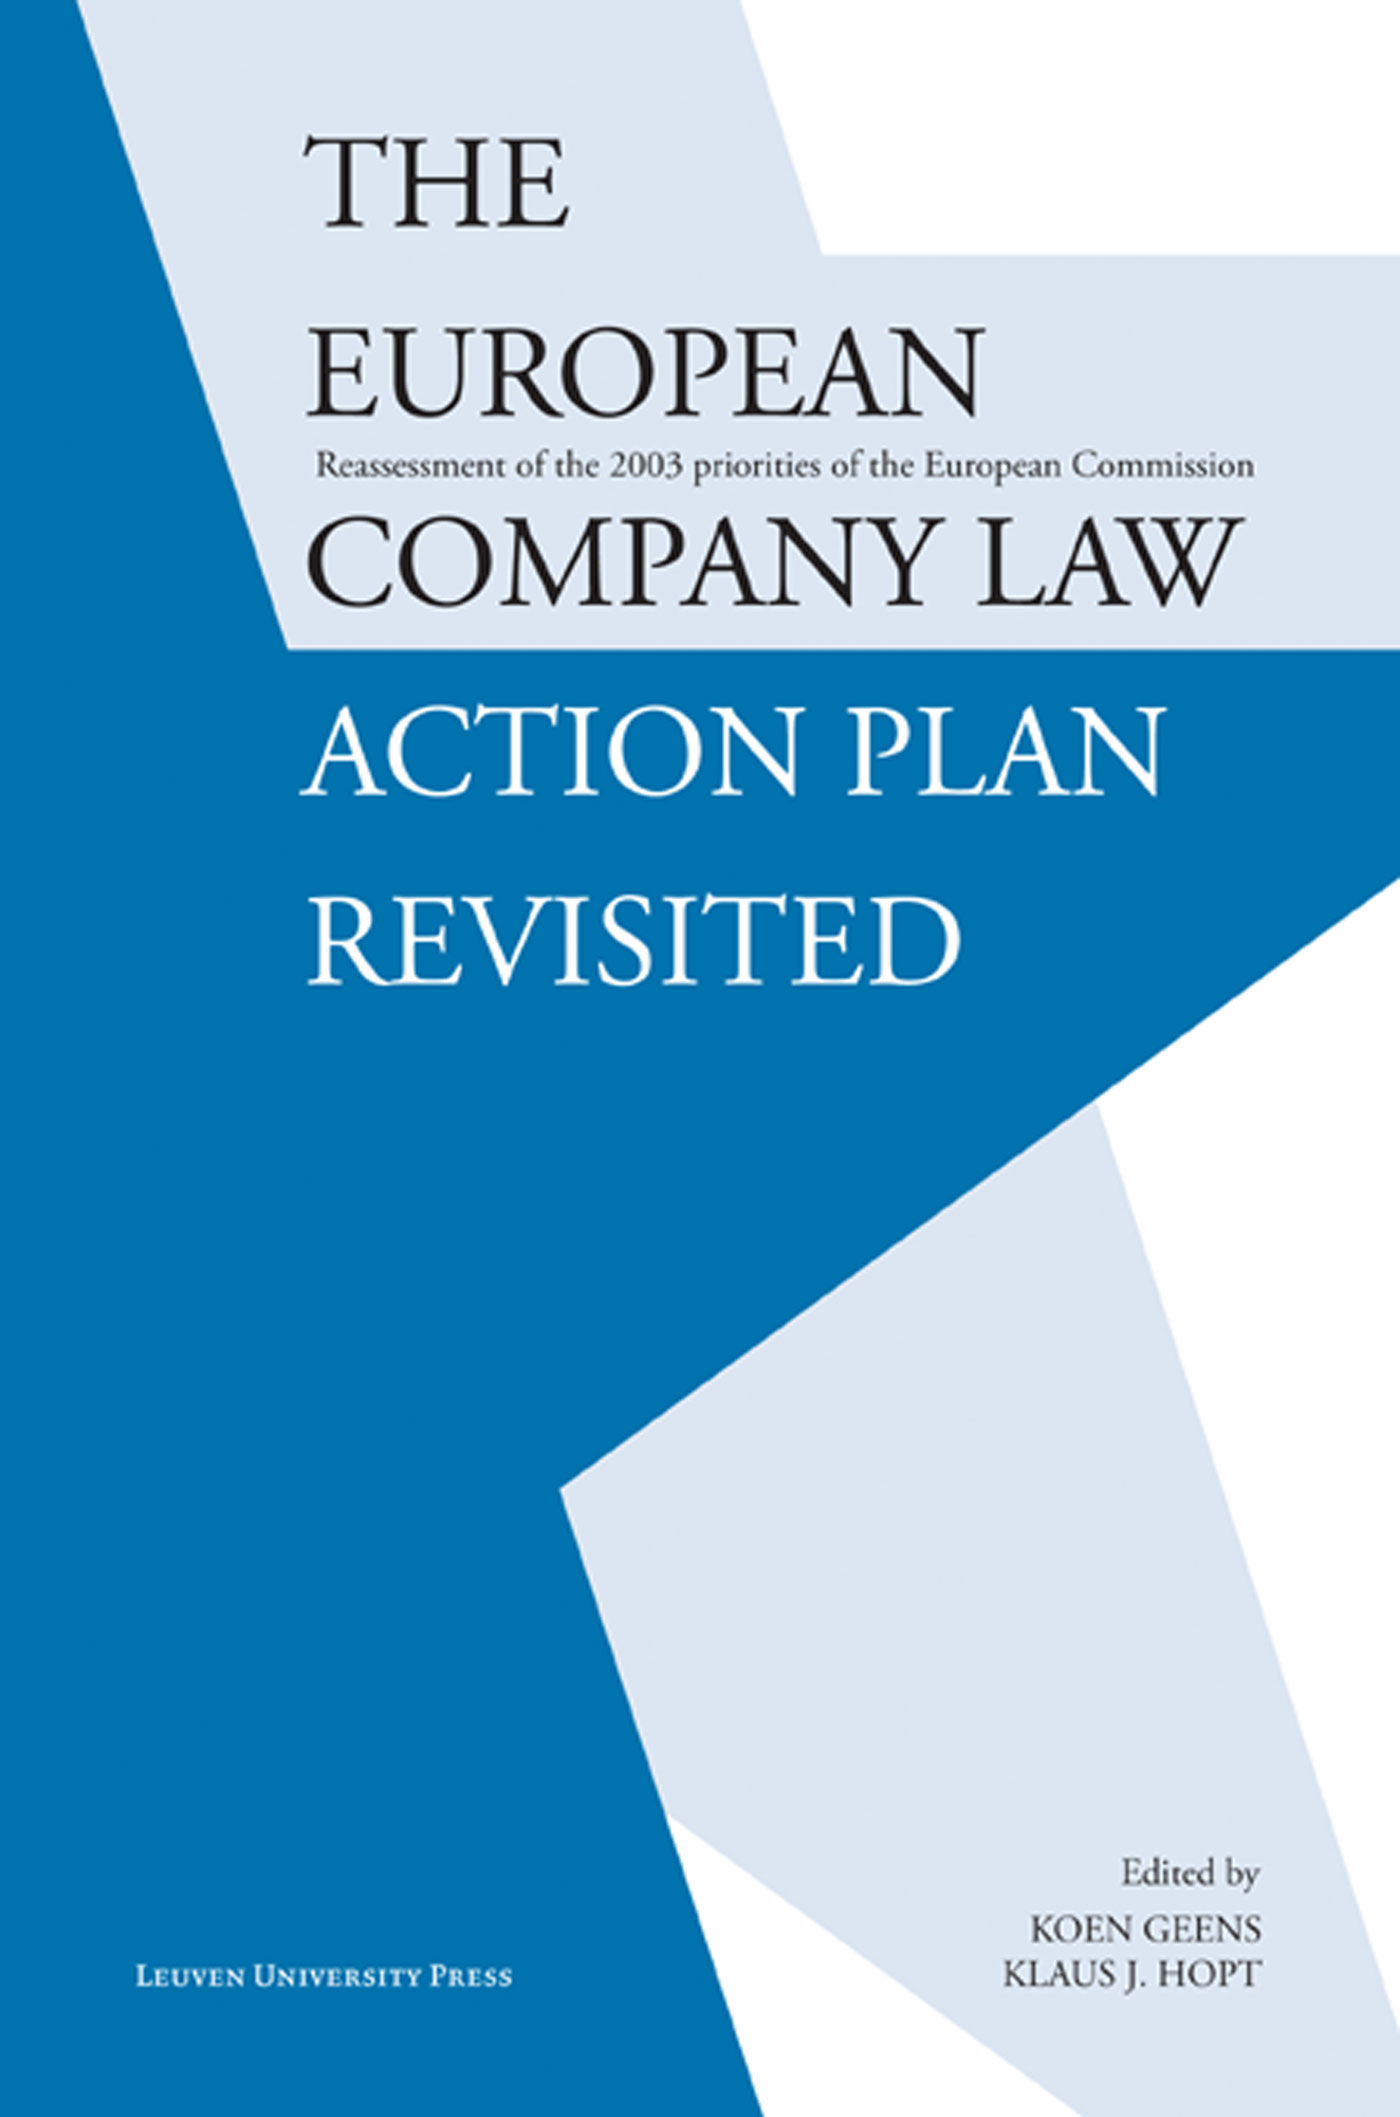 The European company law action plan revisited (Ebook)